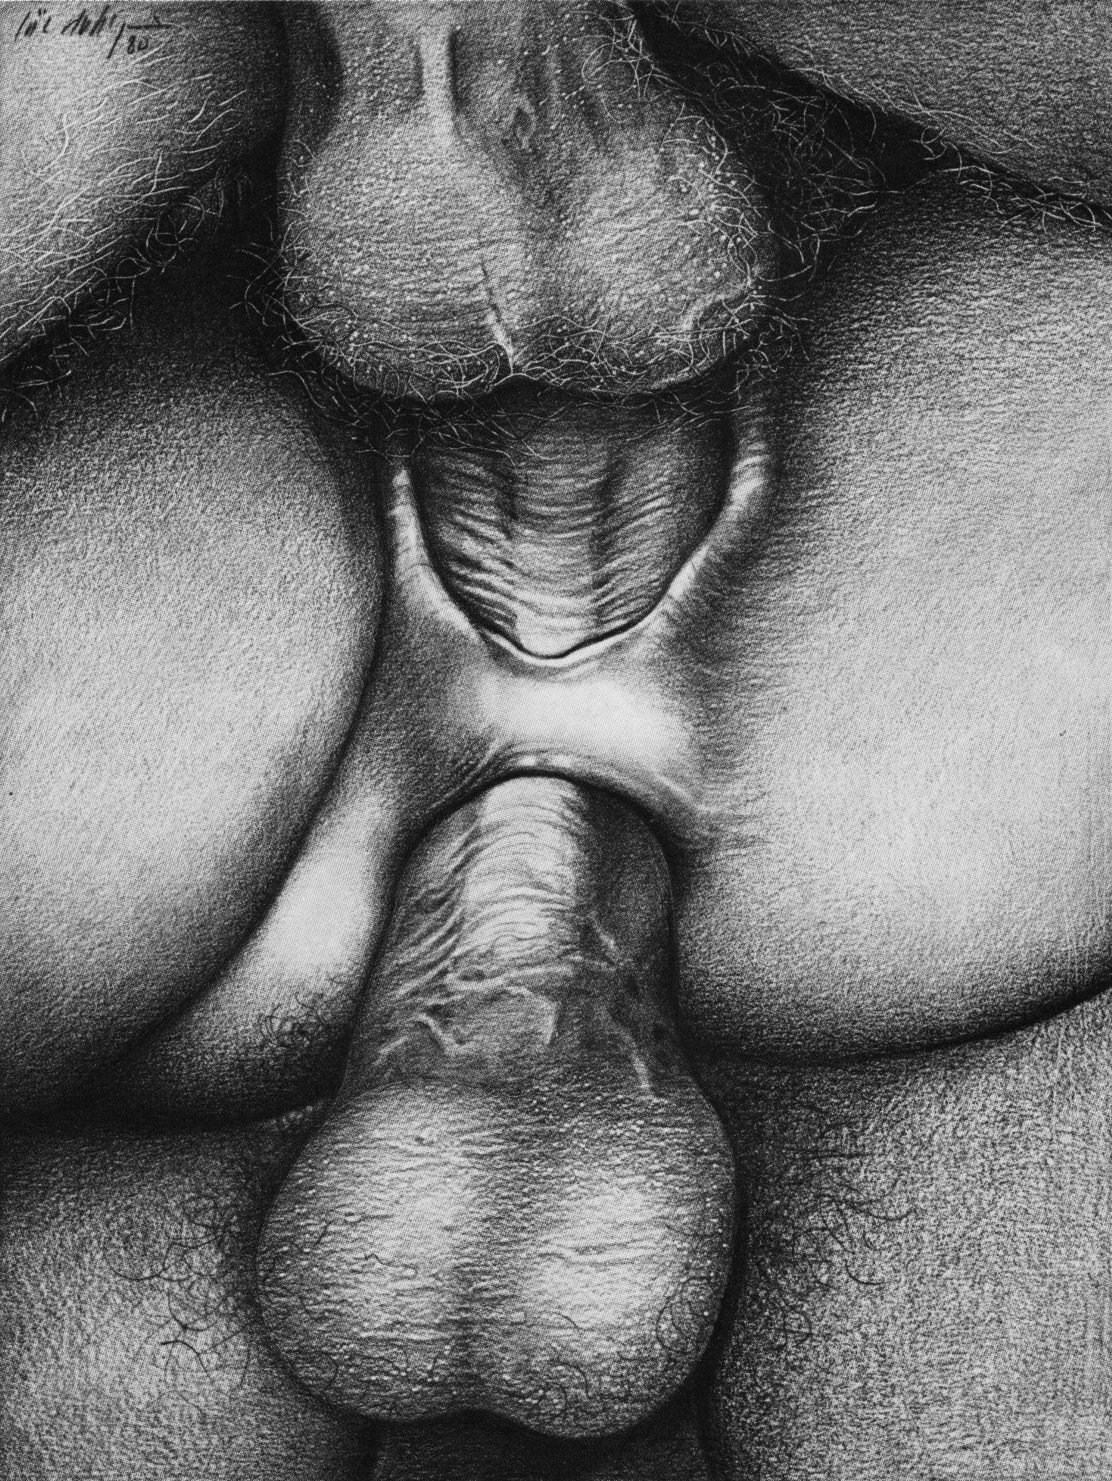 Merriedcouplesex - Sex Drawings | Sex Pictures Pass